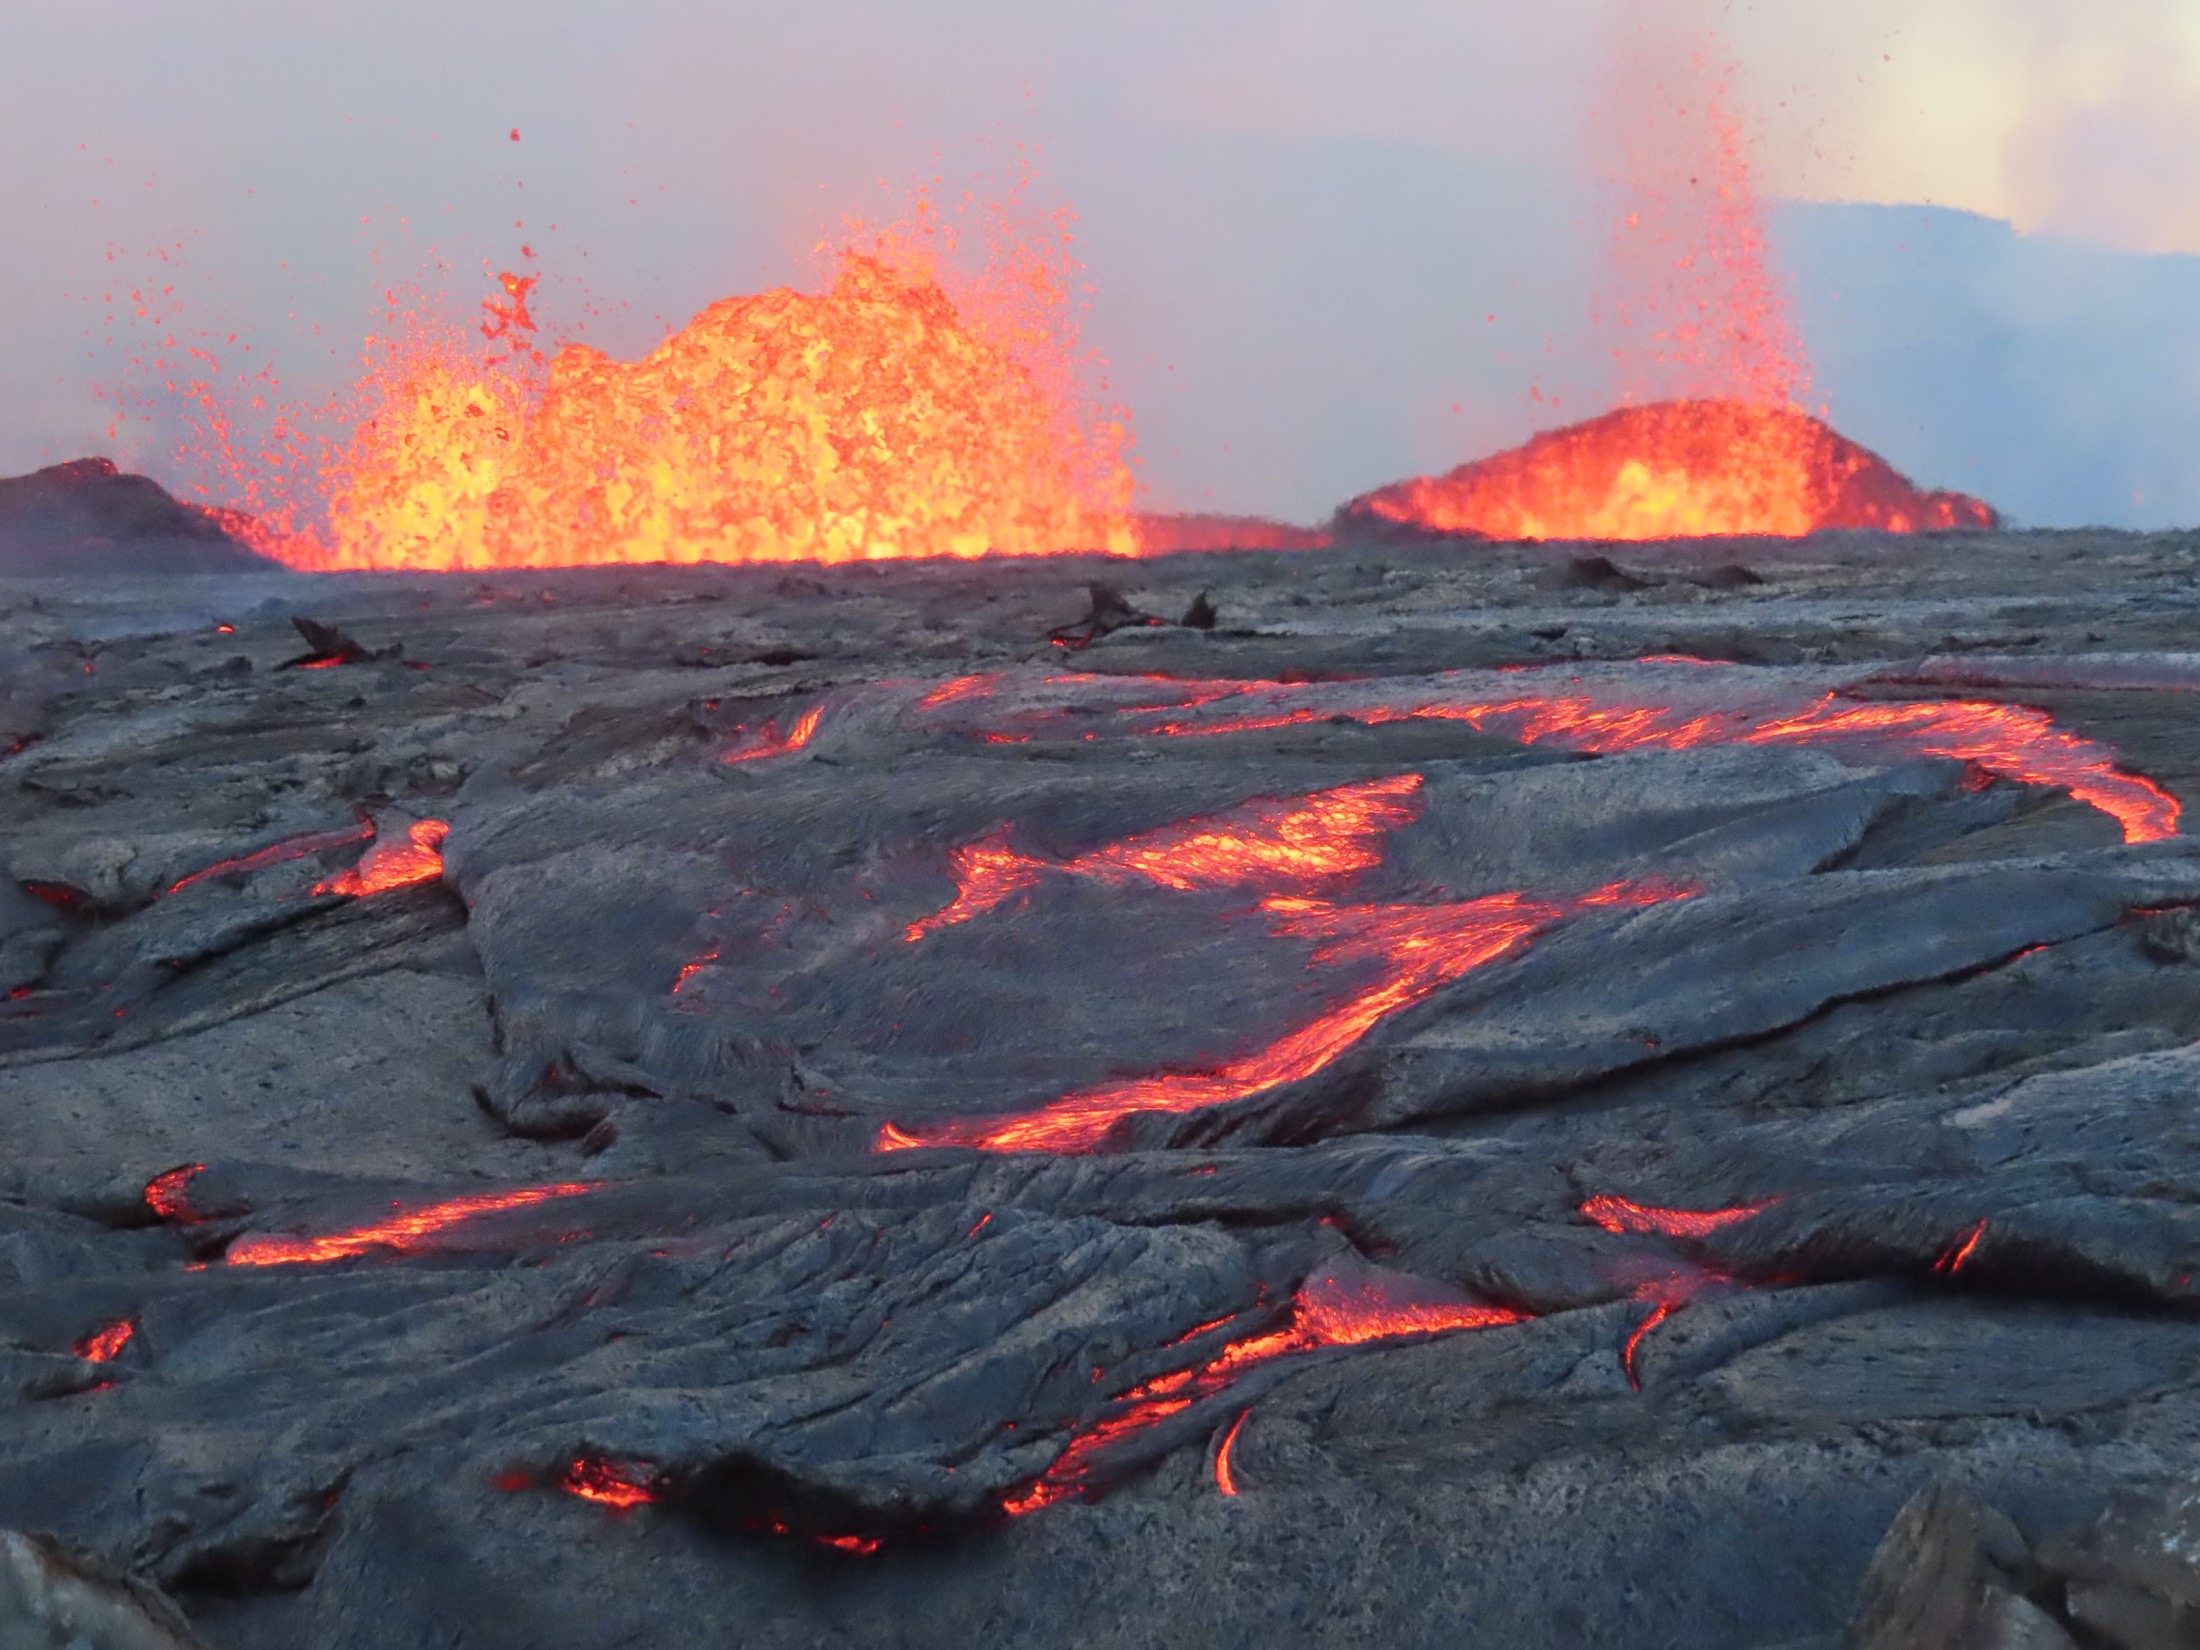 A volcano is erupting with bright, orange lava coming up from the ground